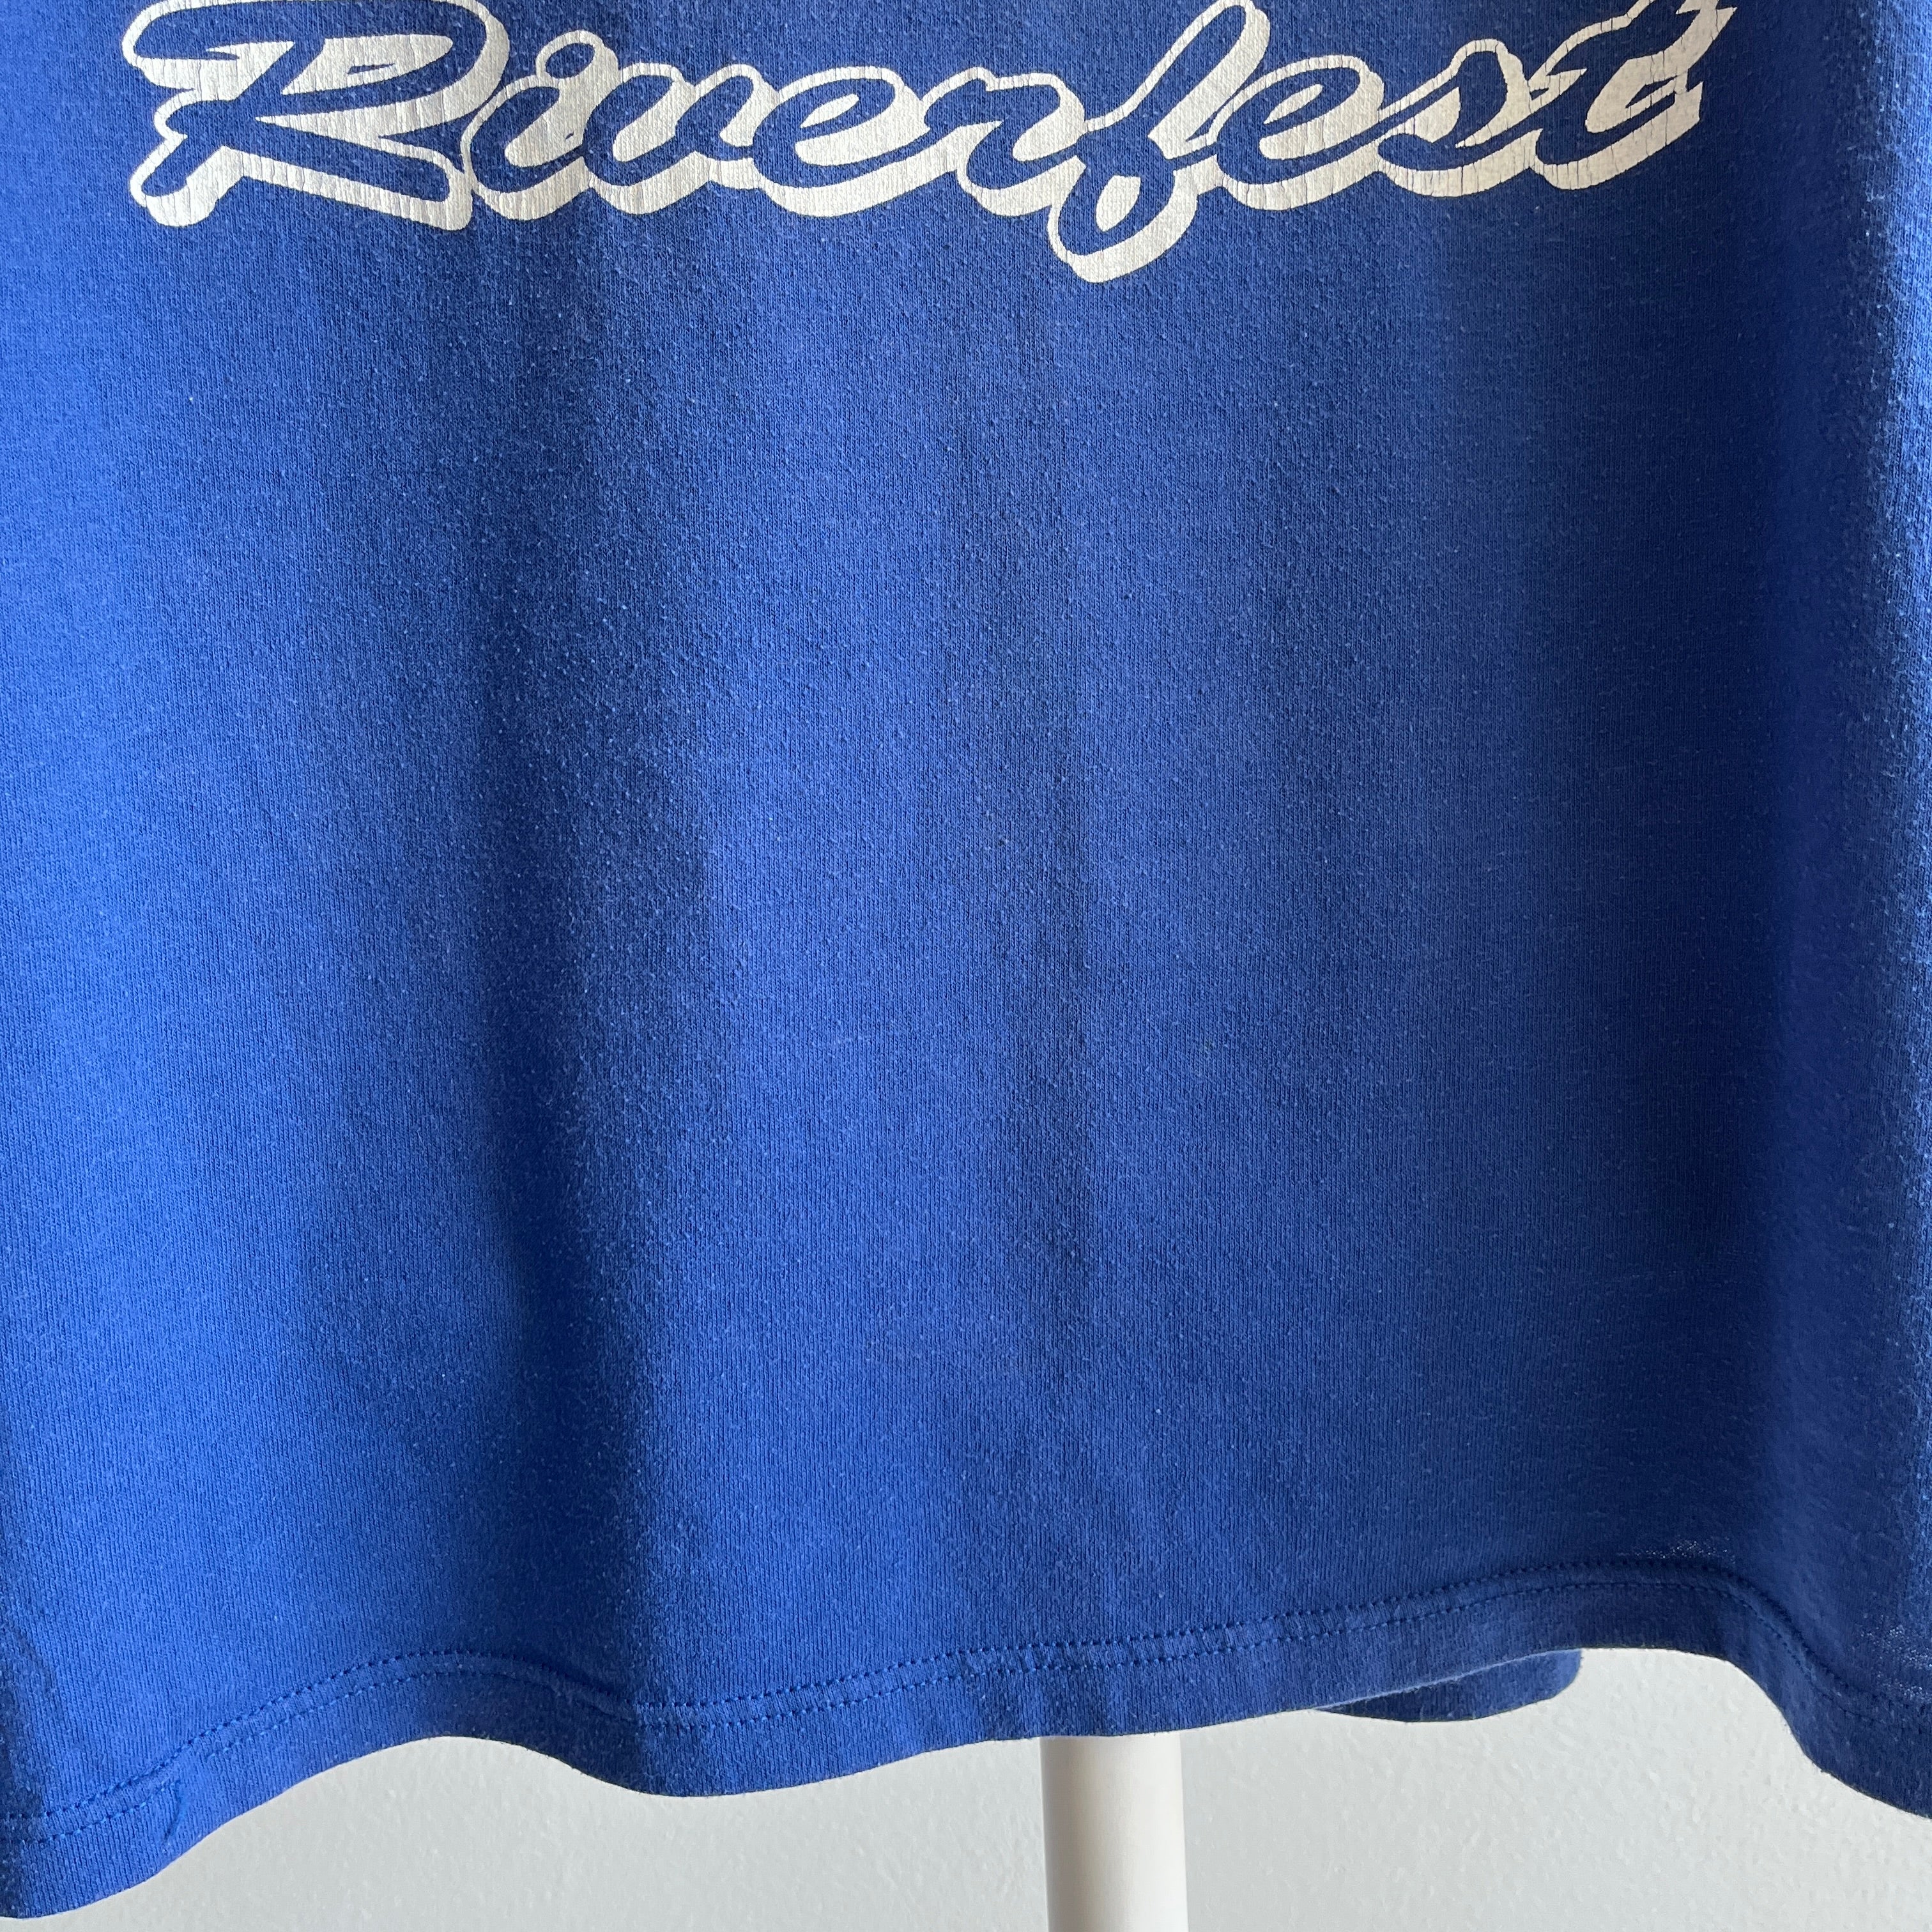 1980s Rices Landing Riverfest Rolled Neck T-shirt by Russell